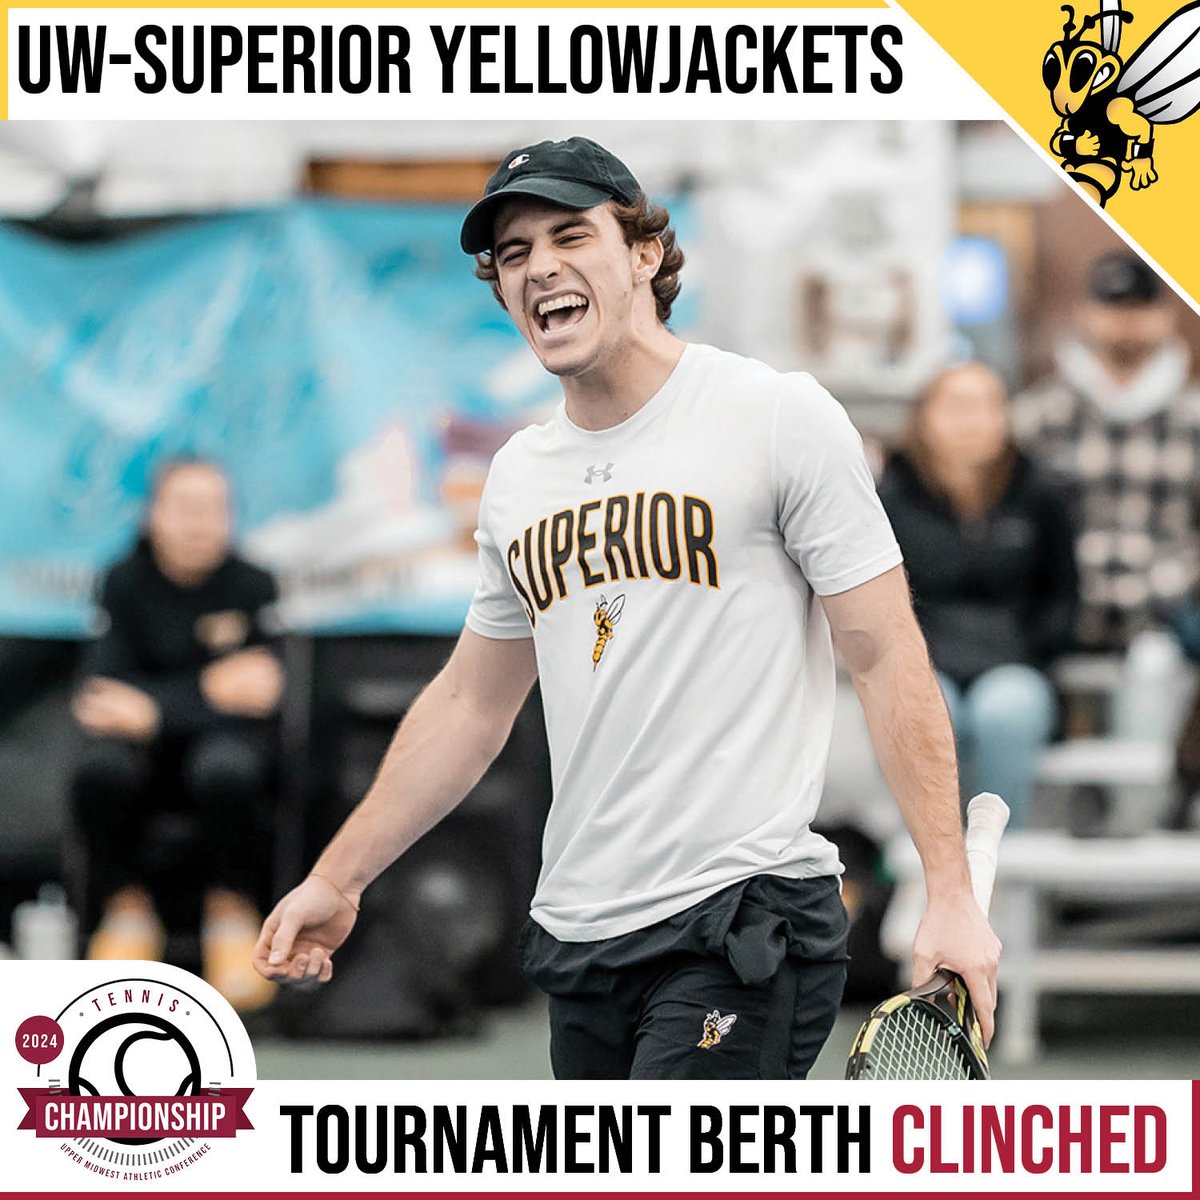 In winning the UMAC North Division title this past weekend, @uwsathletics clinched the northern No. 1 seed in the UMAC Men’s Tennis Tournament! The Yellowjackets are 13-8 overall and went undefeated in conference matches this season! #UMAC | #NCAAD3 | #WhyD3 | #d3tennis